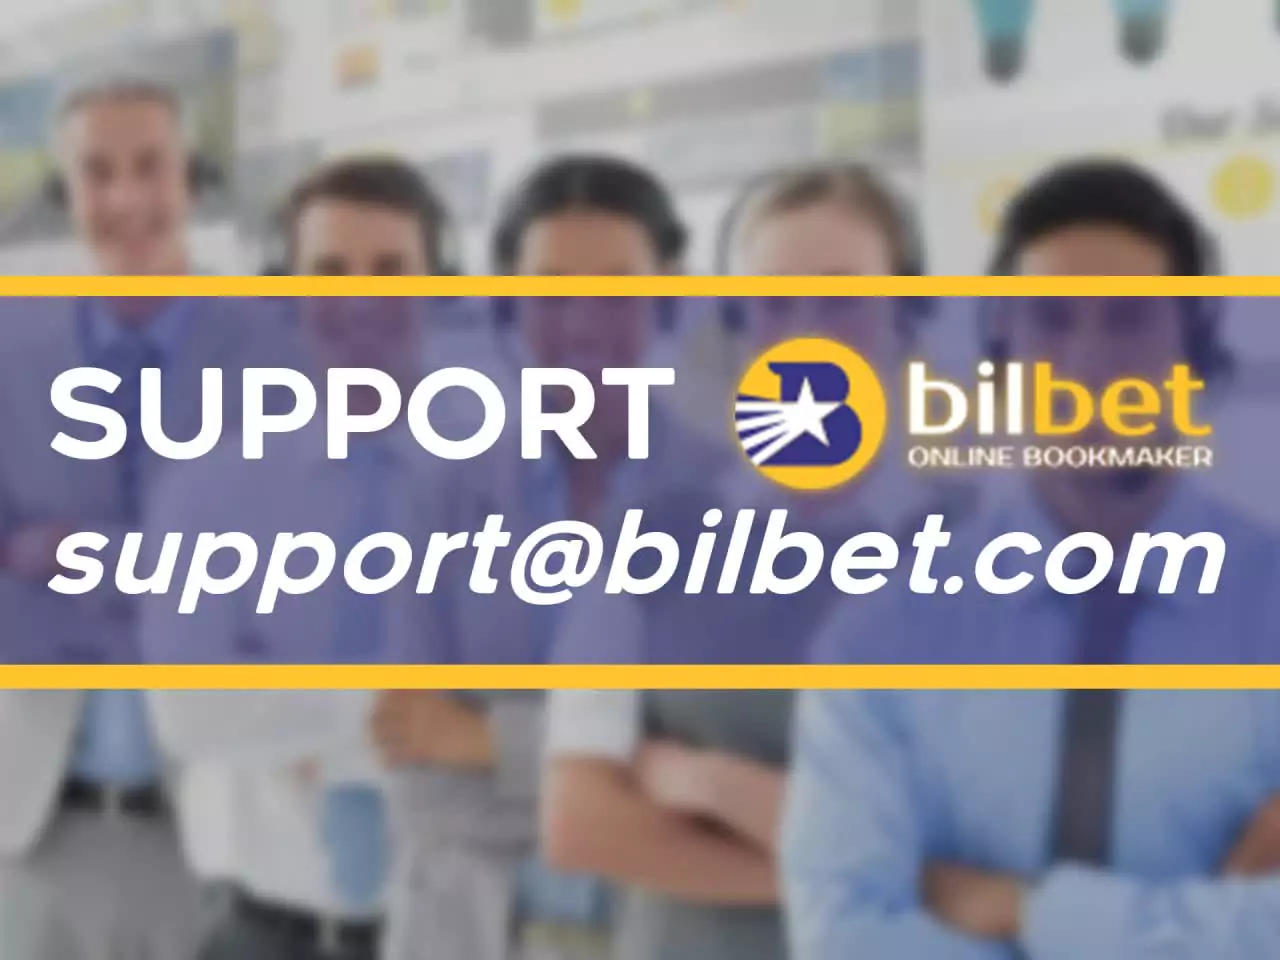 You can contact the support team right in your Bilbet application.